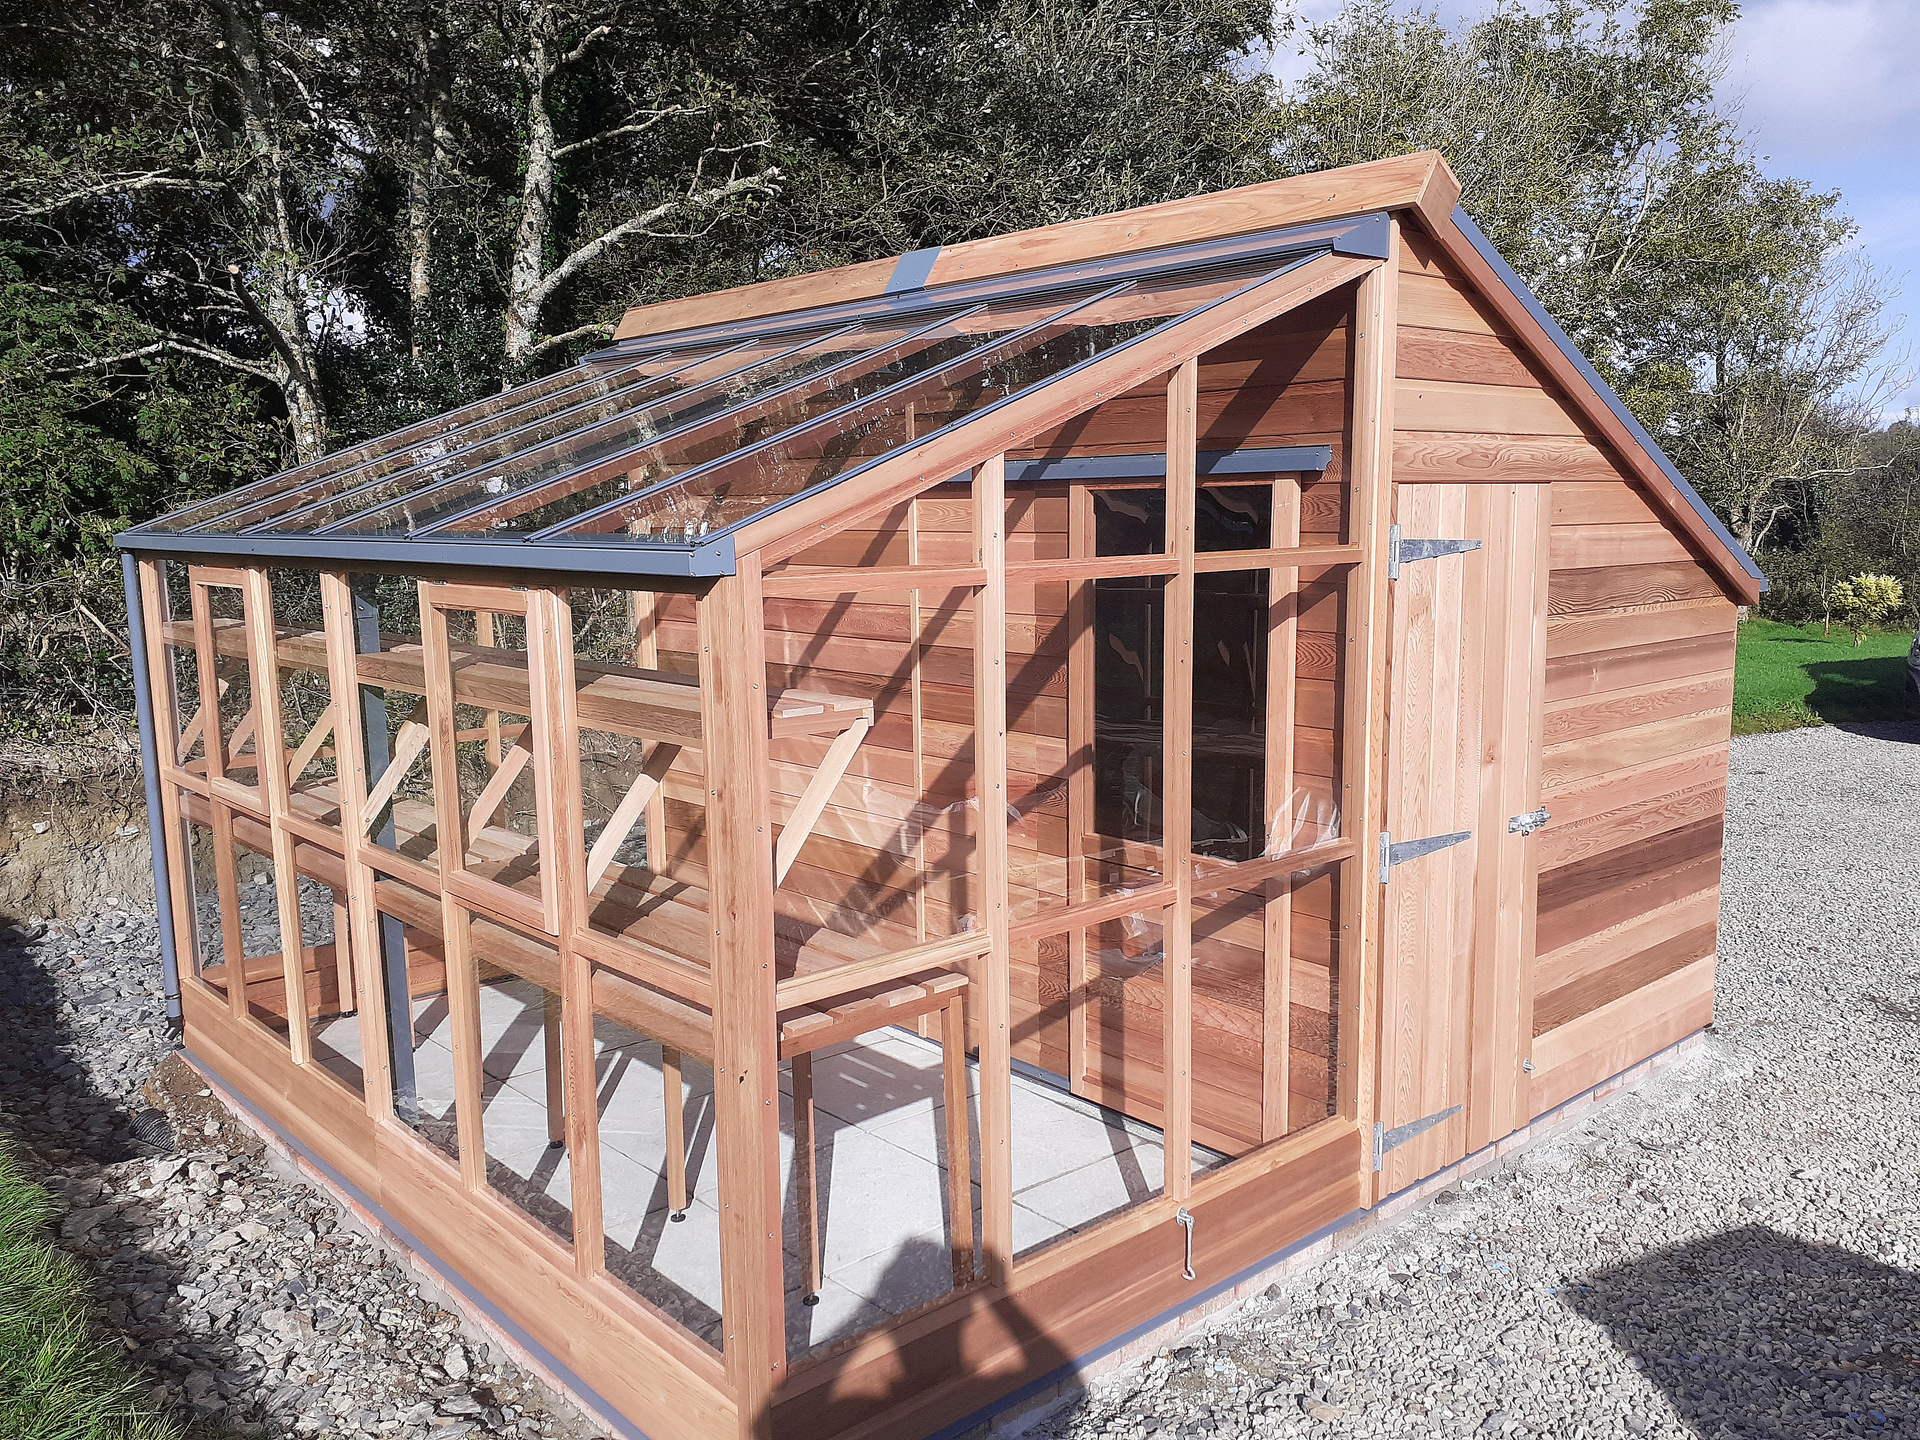 The Gabriel Ash Classic Grand 'Grow & Store' dual purposed Greenhouse/Potting & Storage Shed, supplied + fitted by Owen Chubb in Skibbereen, Co Cork